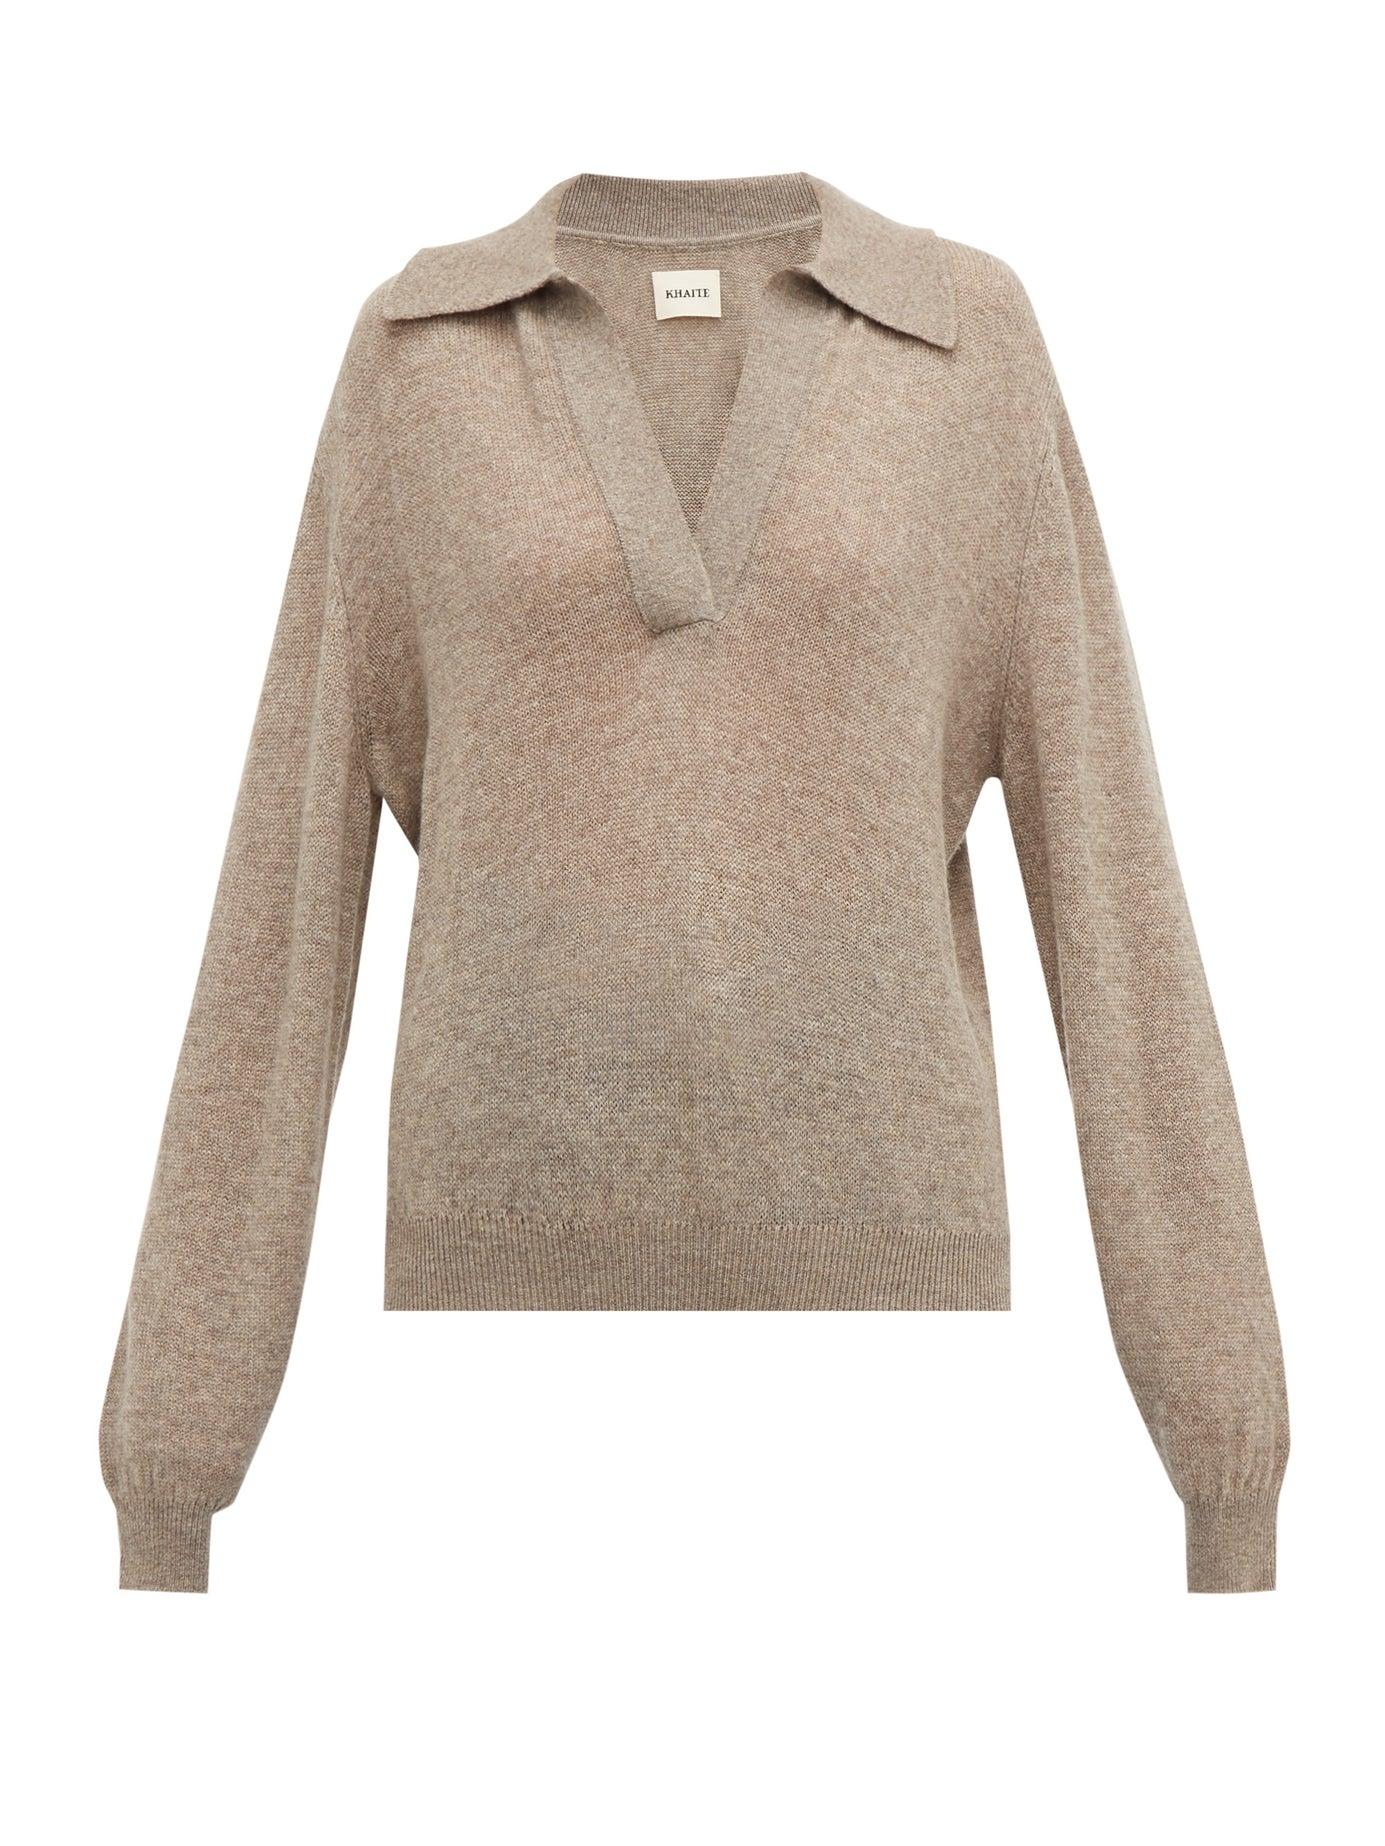 Khaite Jo Collared Cashmere Blend Sweater in Natural - Lyst